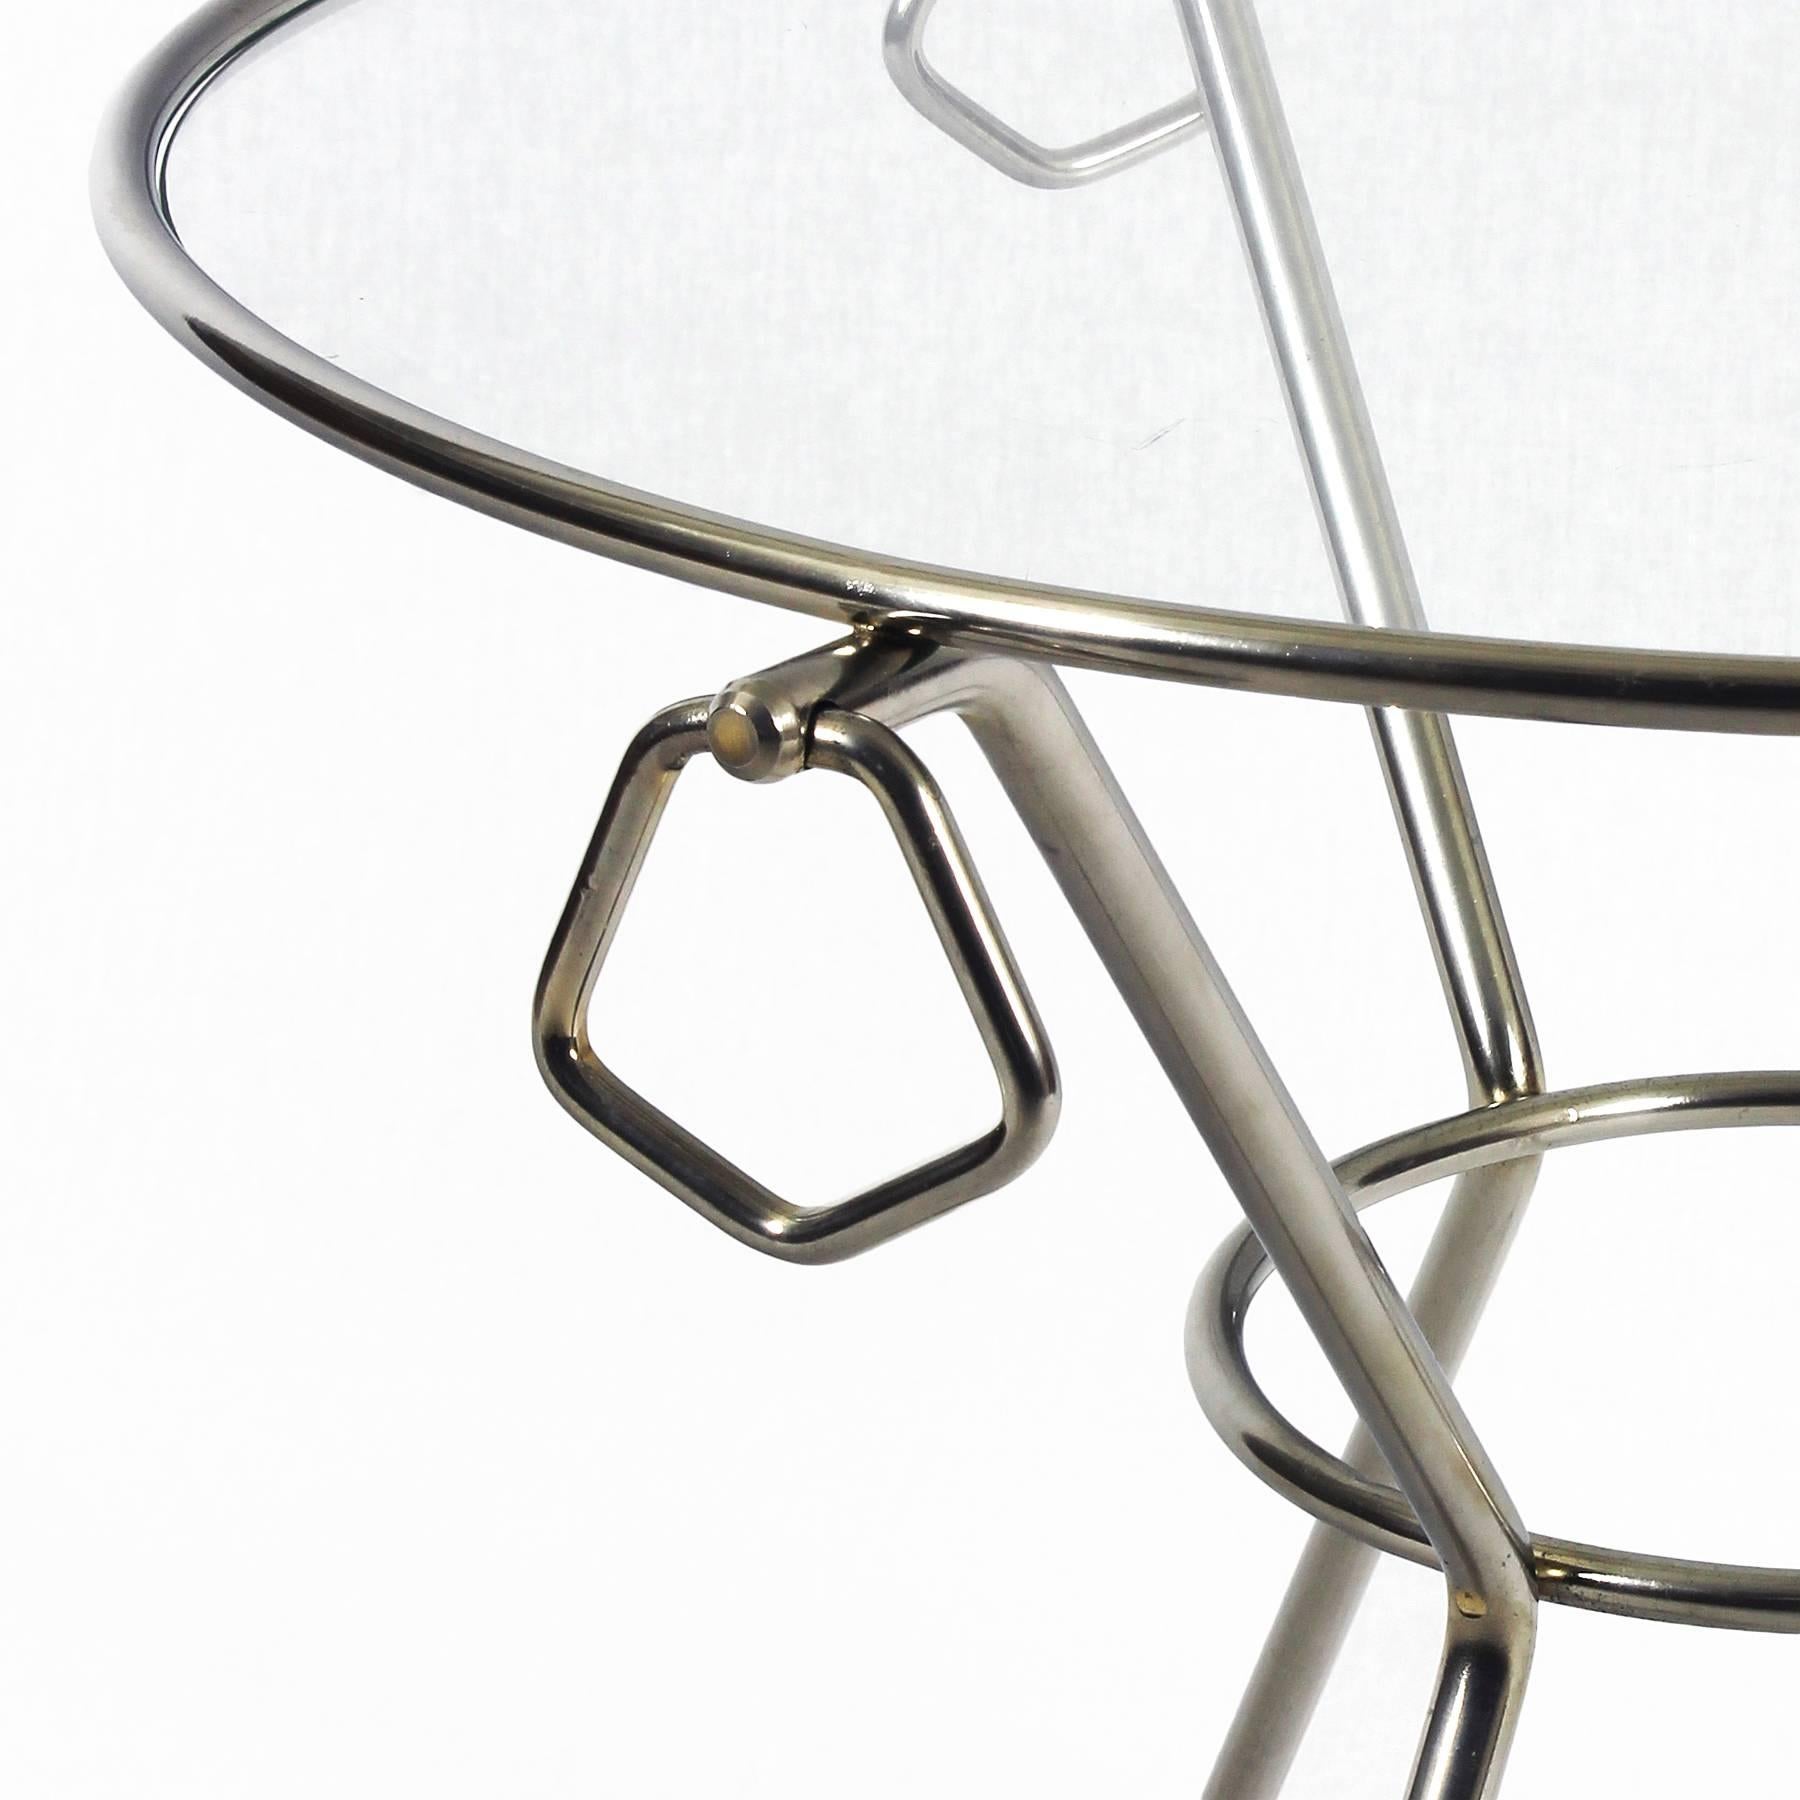 French SmallMid-Century Moder Tripod Table, Nickel Plated Brass, Glass, Rings - France For Sale